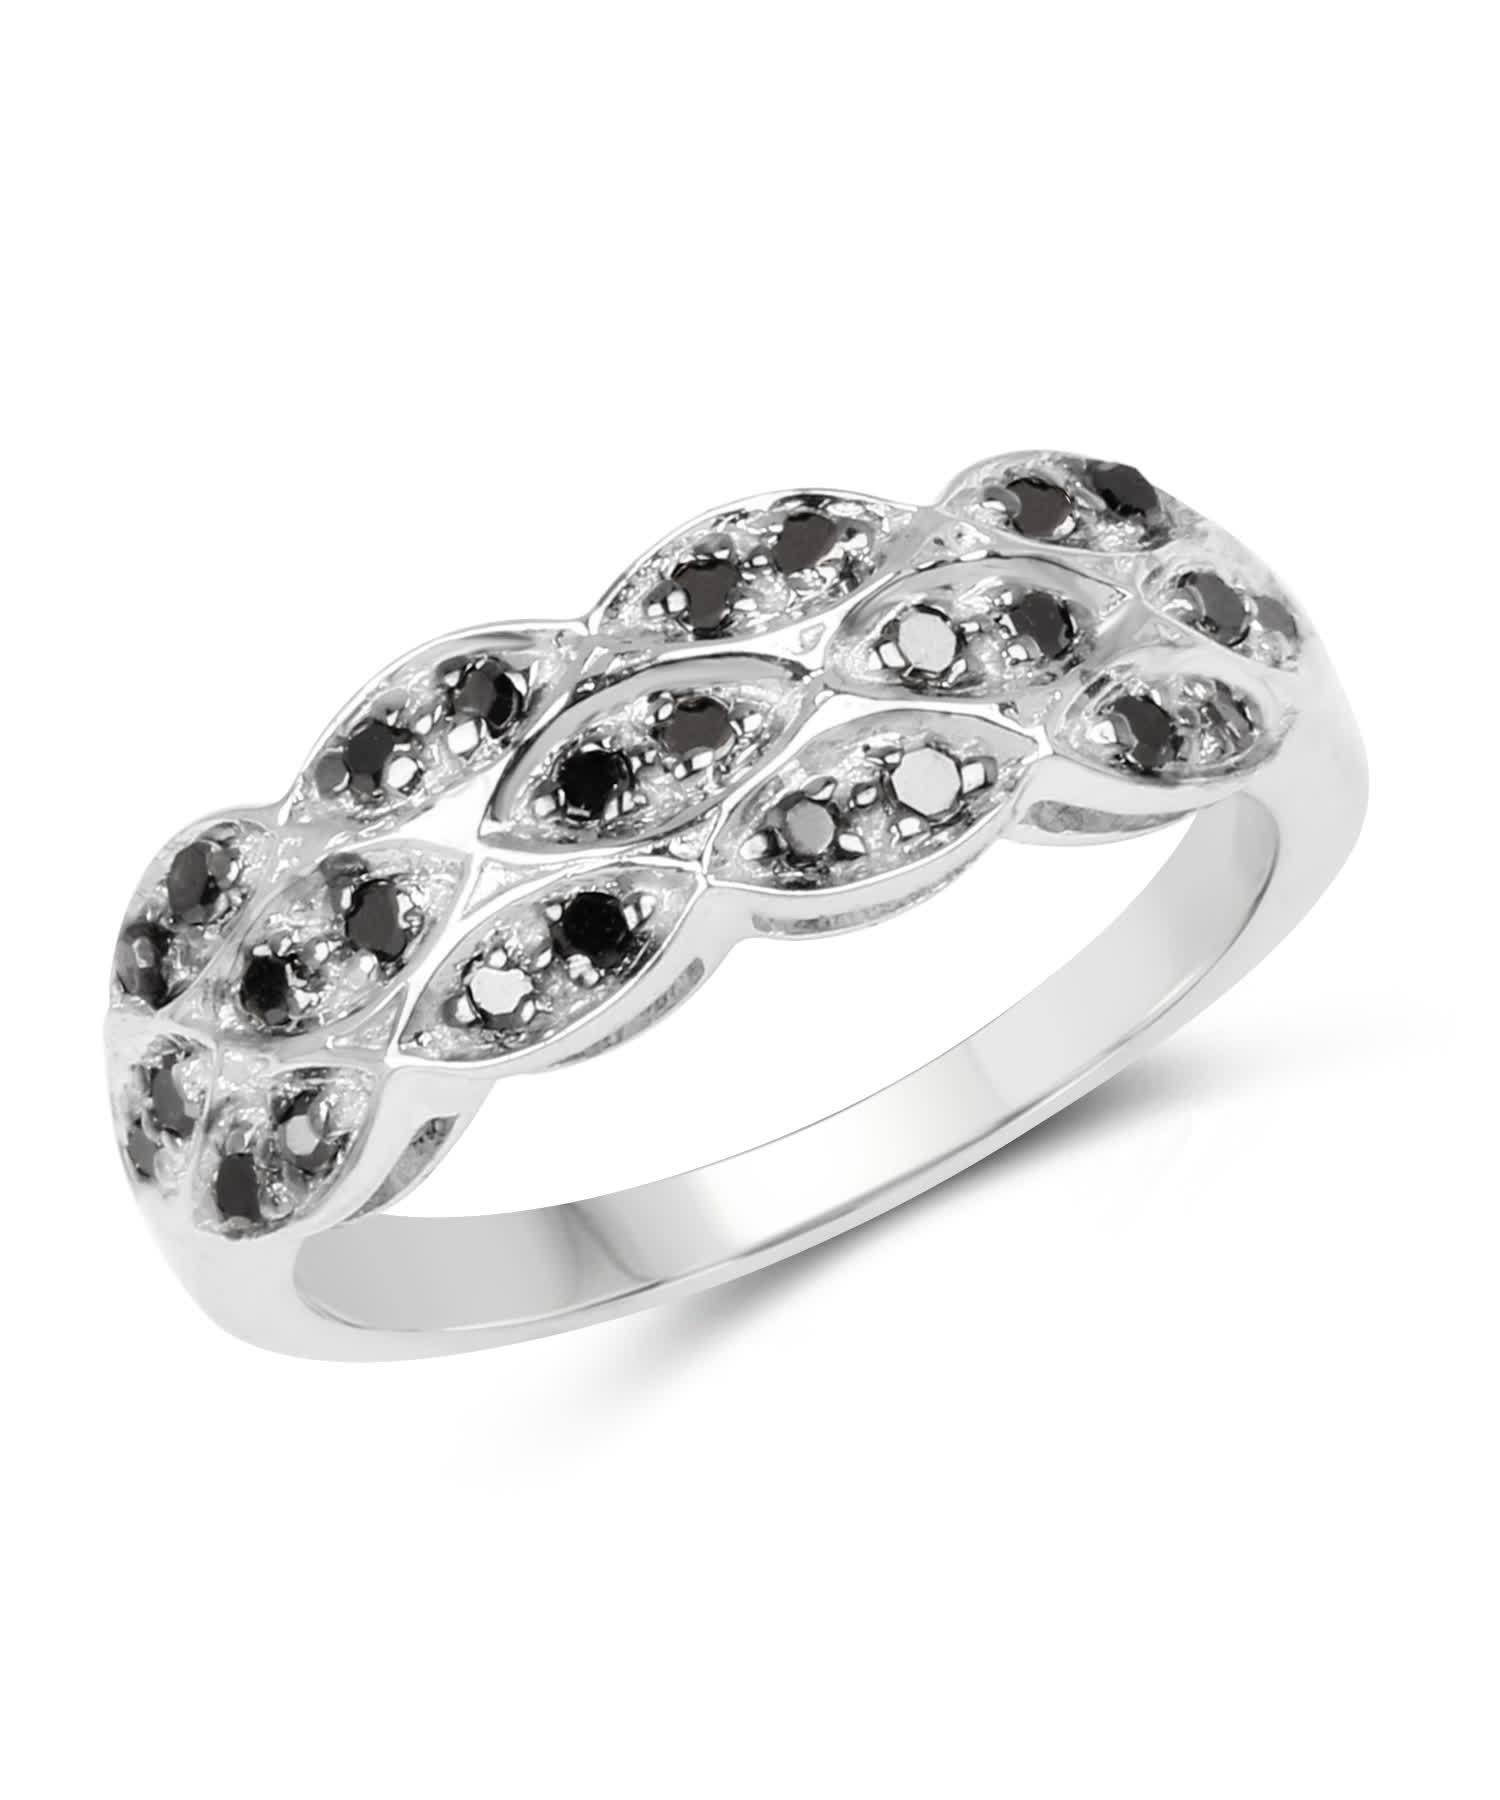 0.28ctw Black Diamond Rhodium Plated 925 Sterling Silver Ring View 1